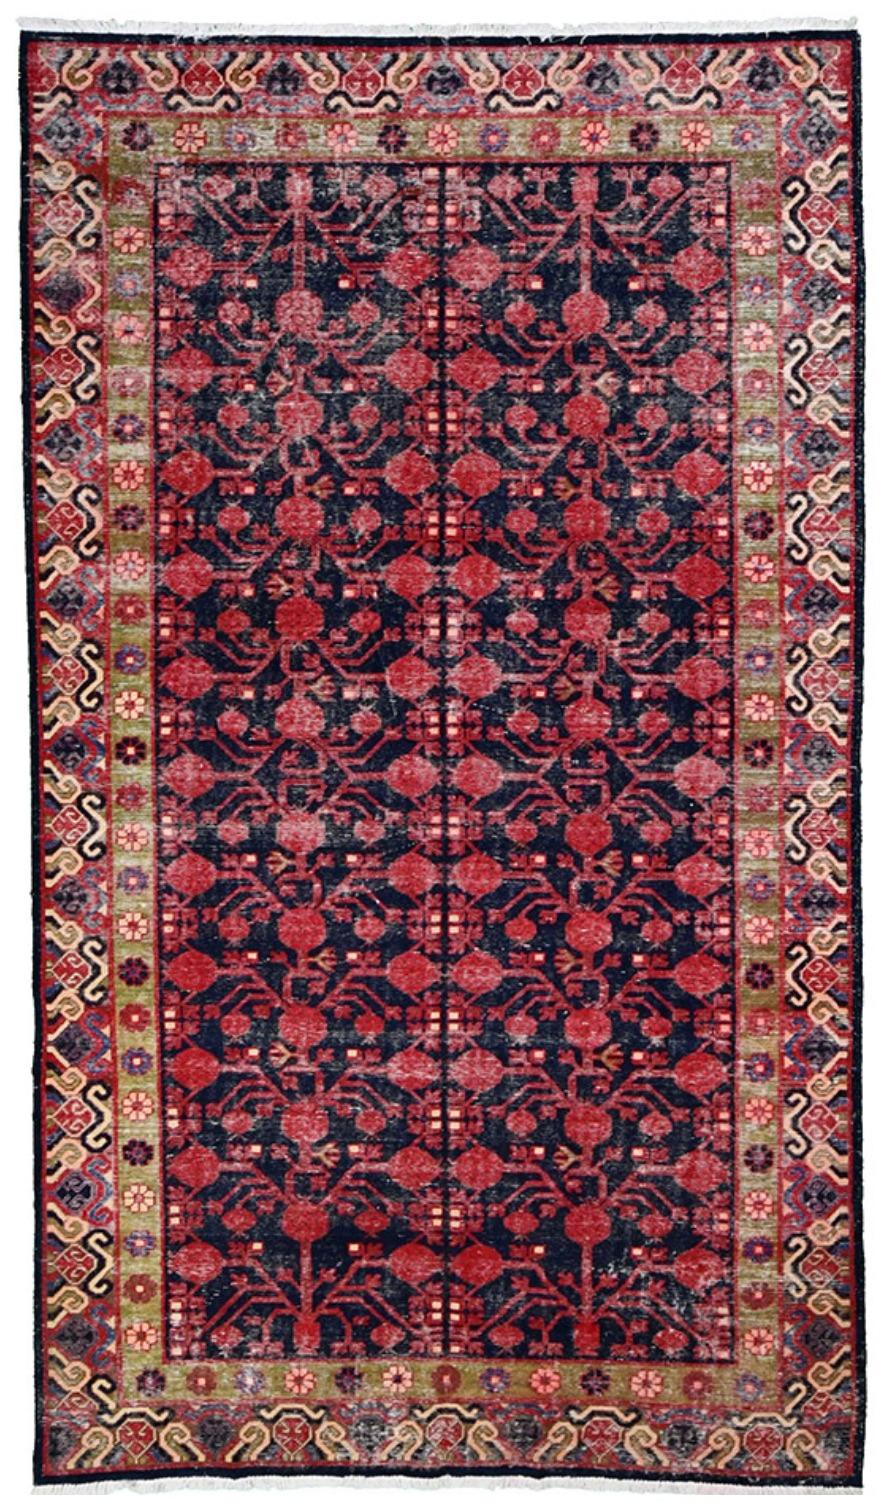 Dimension: 9’3″ x 4’3″

Origin: Mongolia

16962

Composition:100% Wool Pile Hand Knotted
